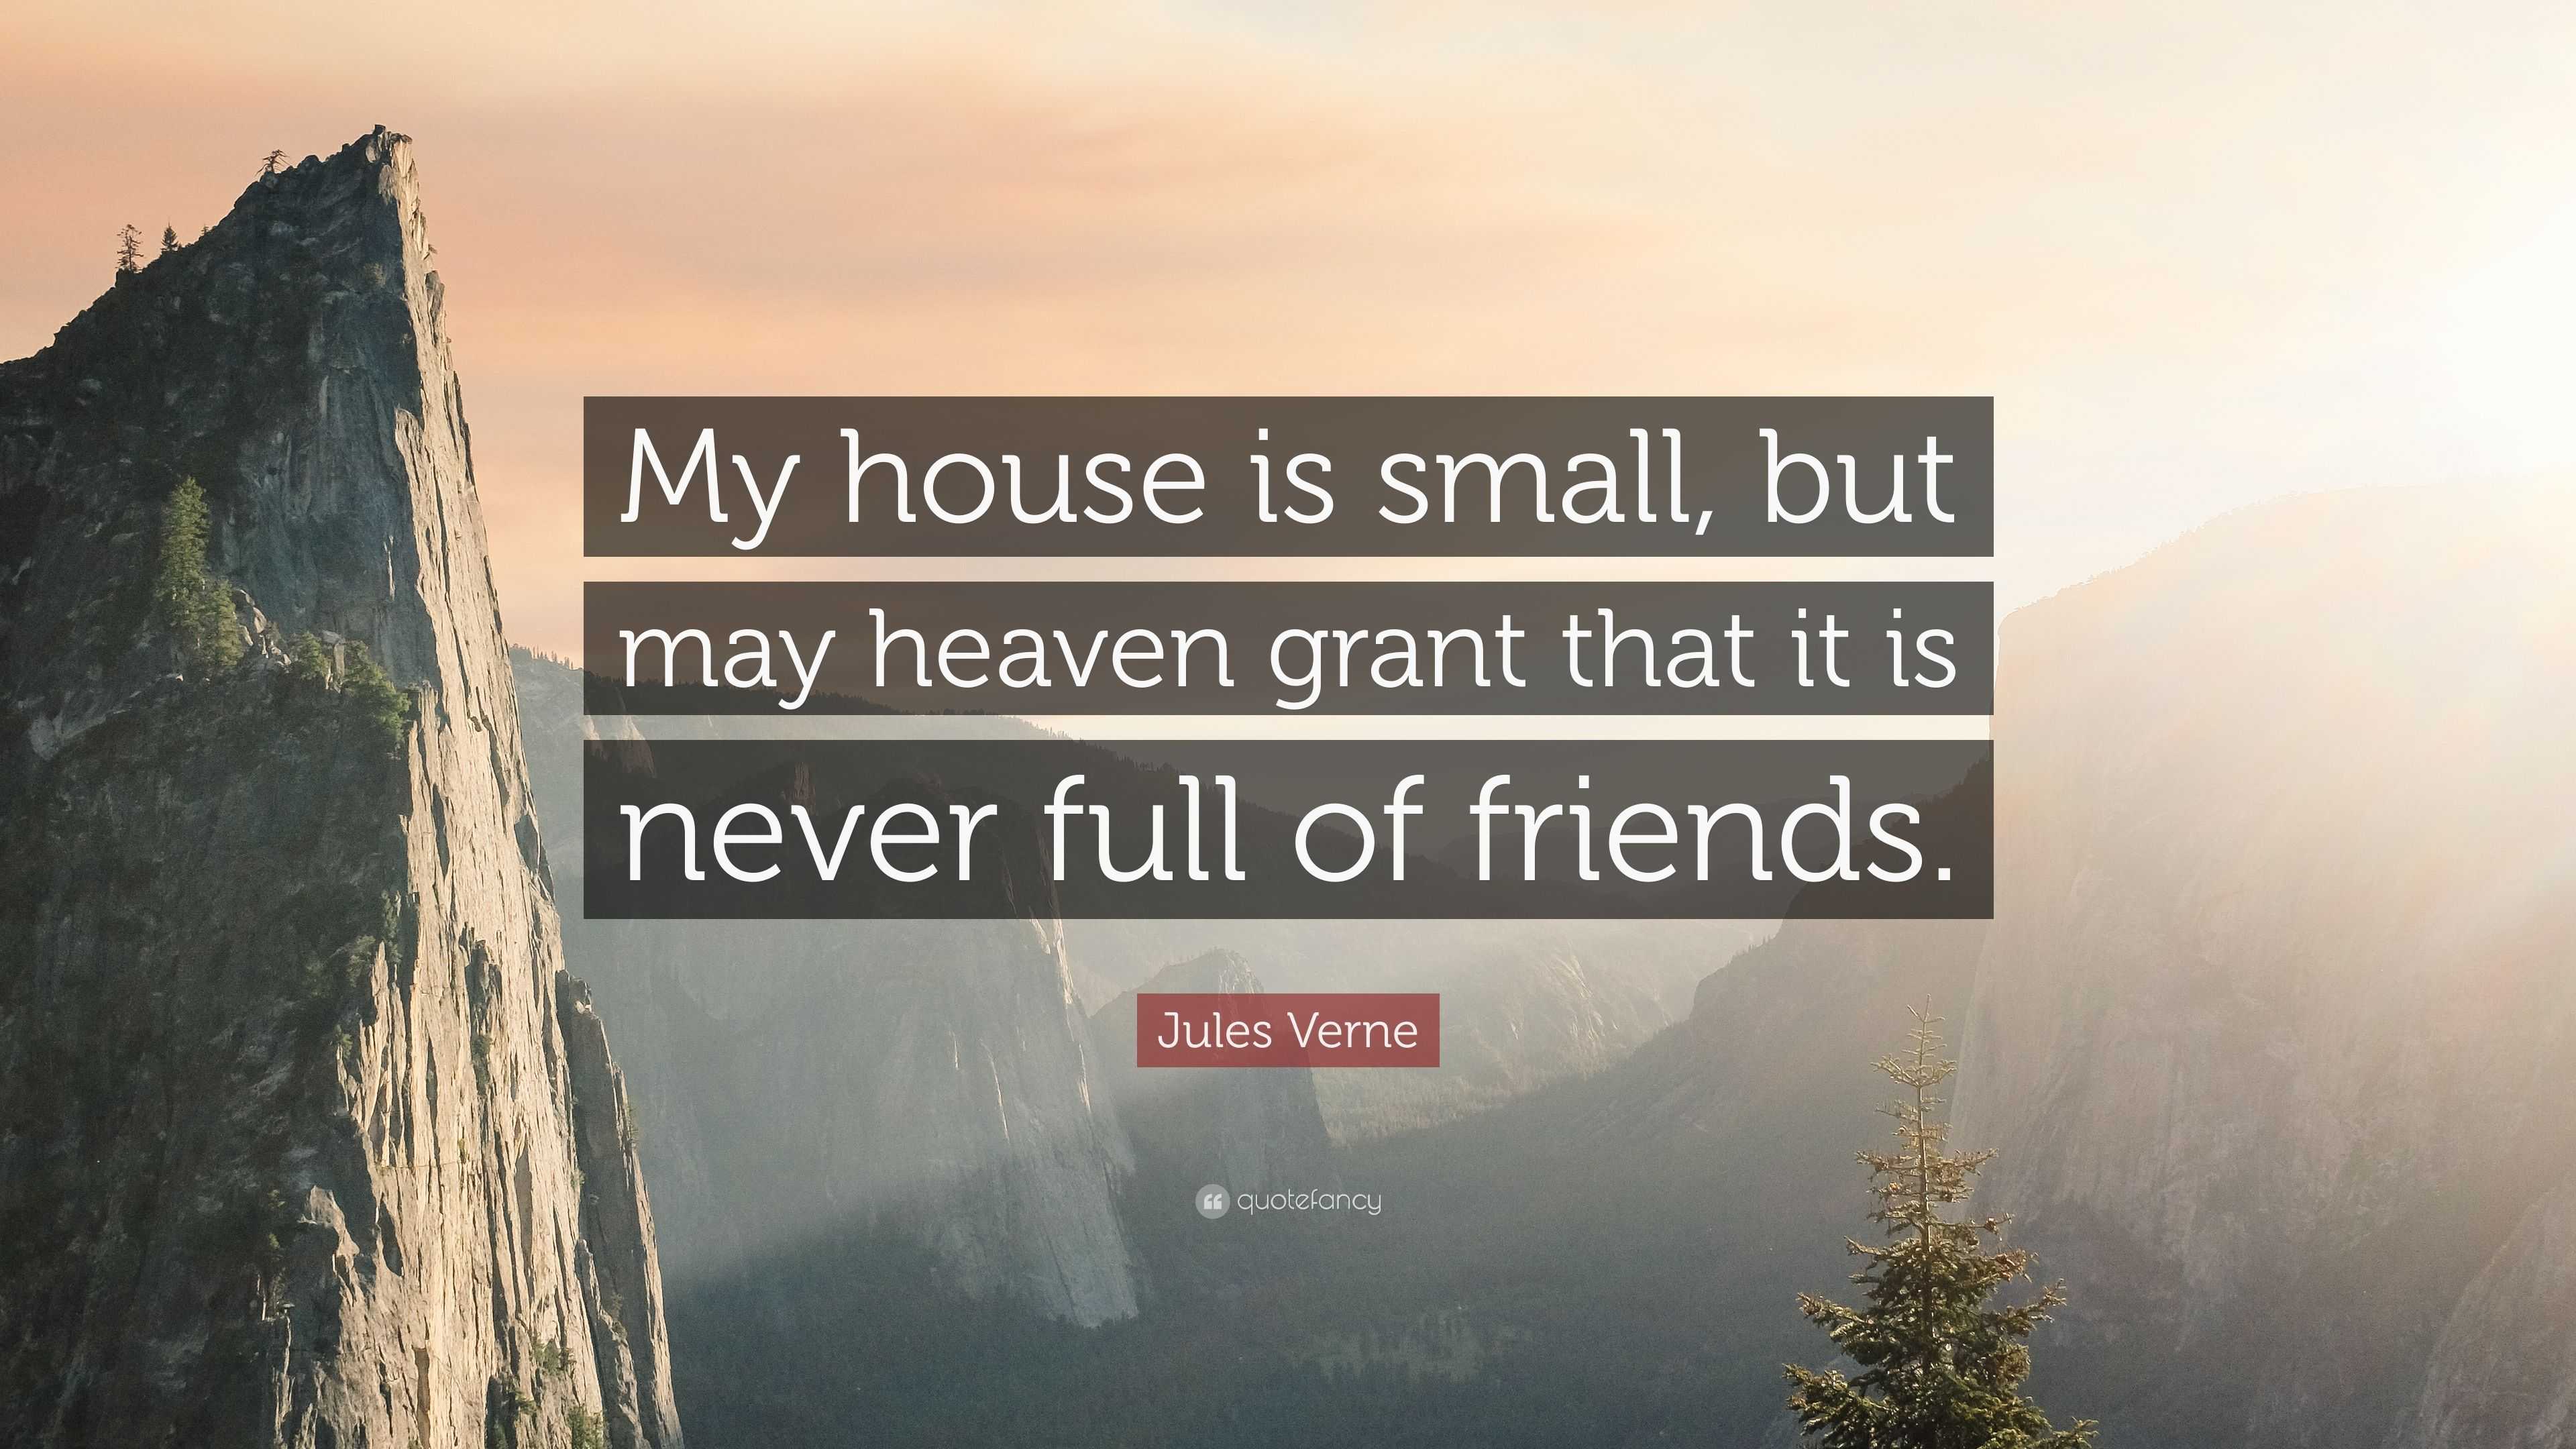 Jules Verne Quote: “My house is small, but may heaven grant that it is ...